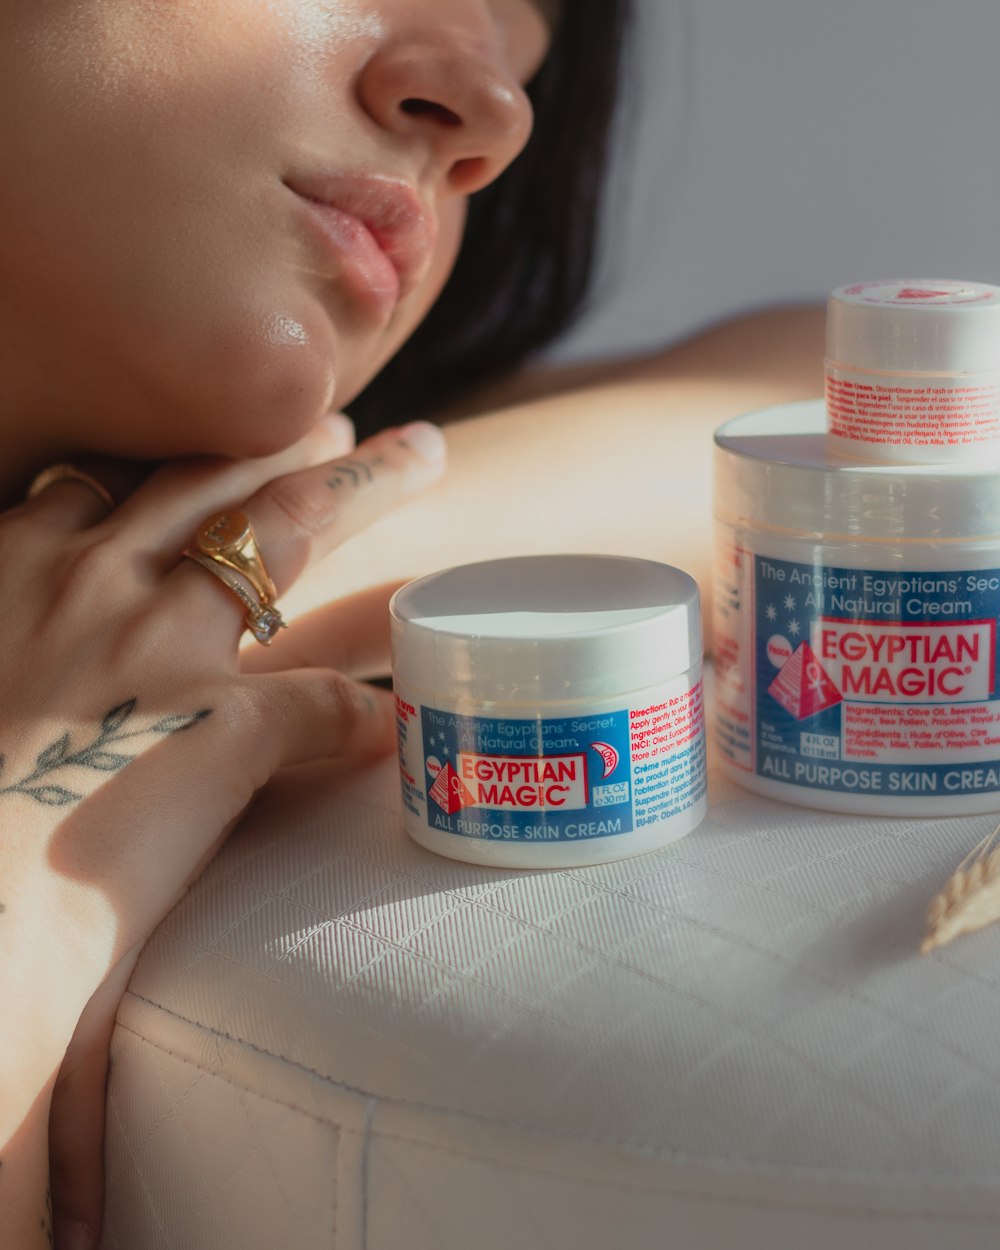 a woman with tattoos on her arm next to a jar of cream